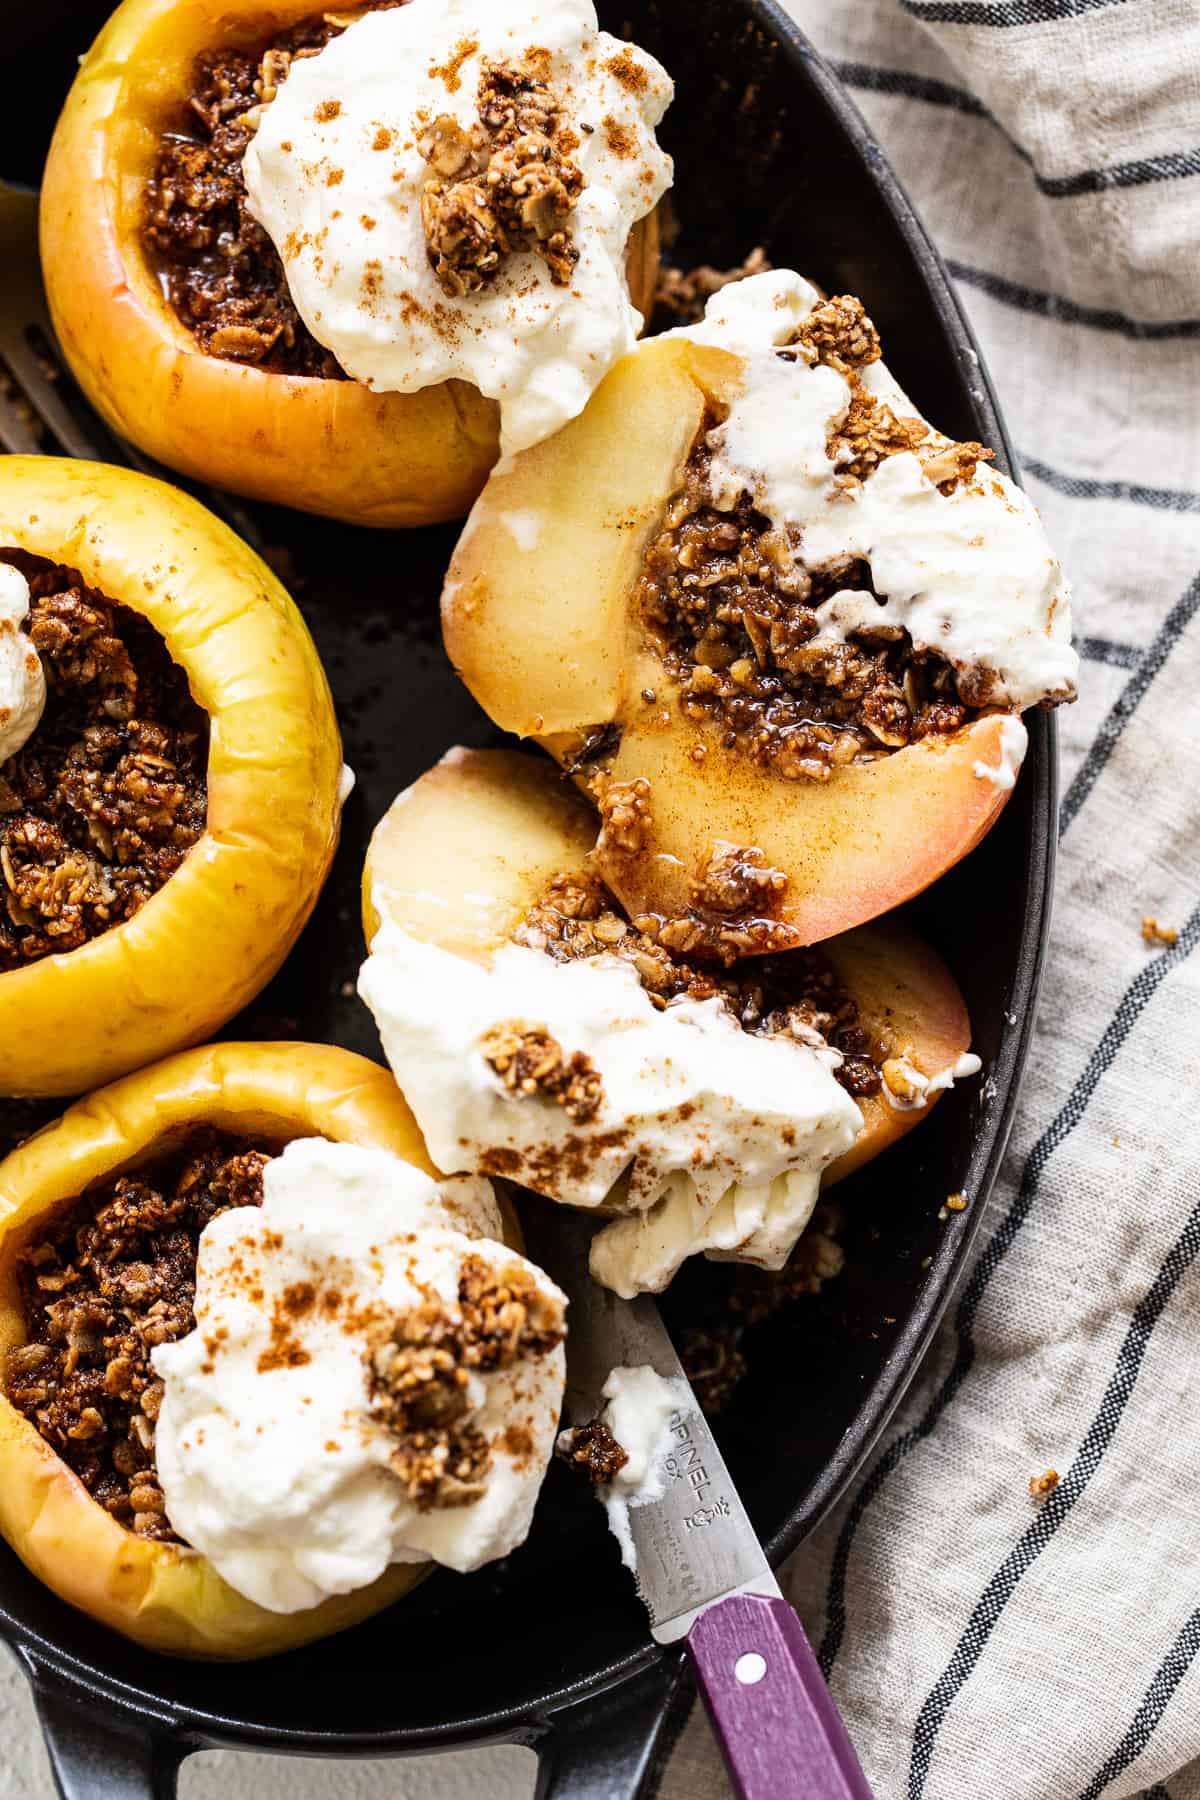 Baked apples topped with whipped cream.